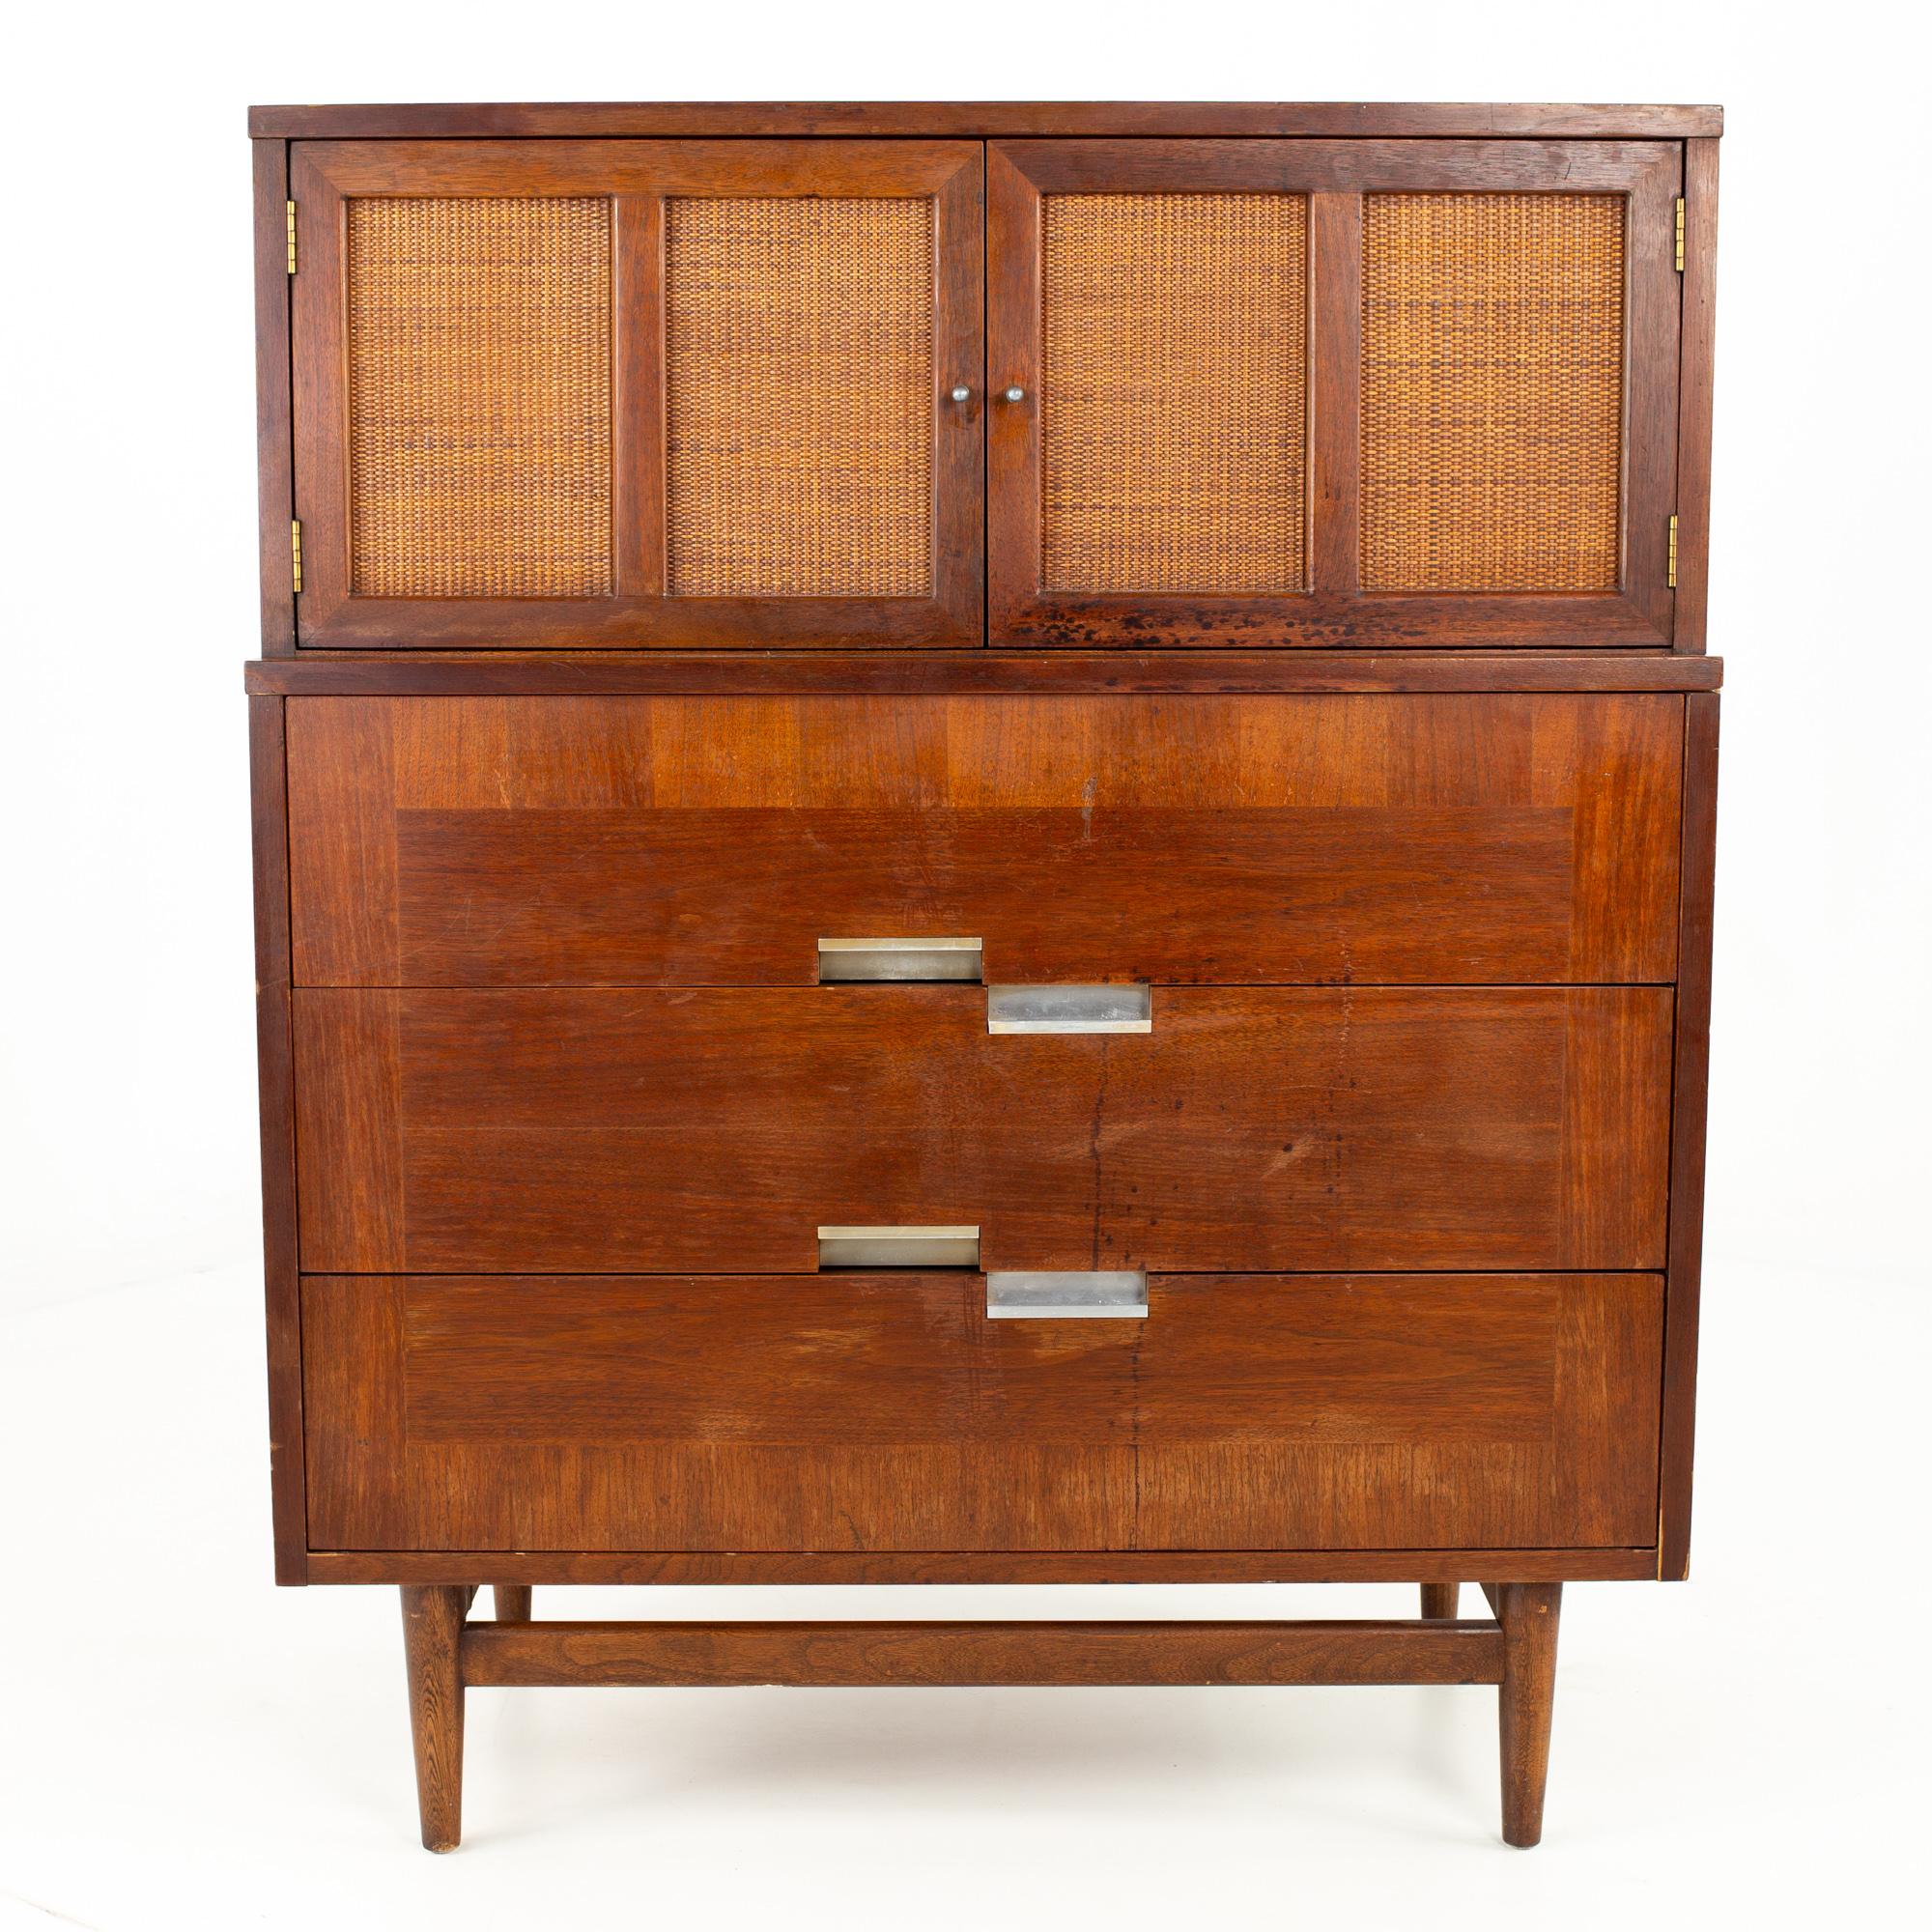 Restored Merton Gershun for American of Martinsville Mid Century X inlay walnut 9 drawer dresser
Measures: 36 wide x 17 deep x 44.5 high
See below for 5 ways to save!
Free restoration: When you purchase a piece we carefully clean and prepare it for